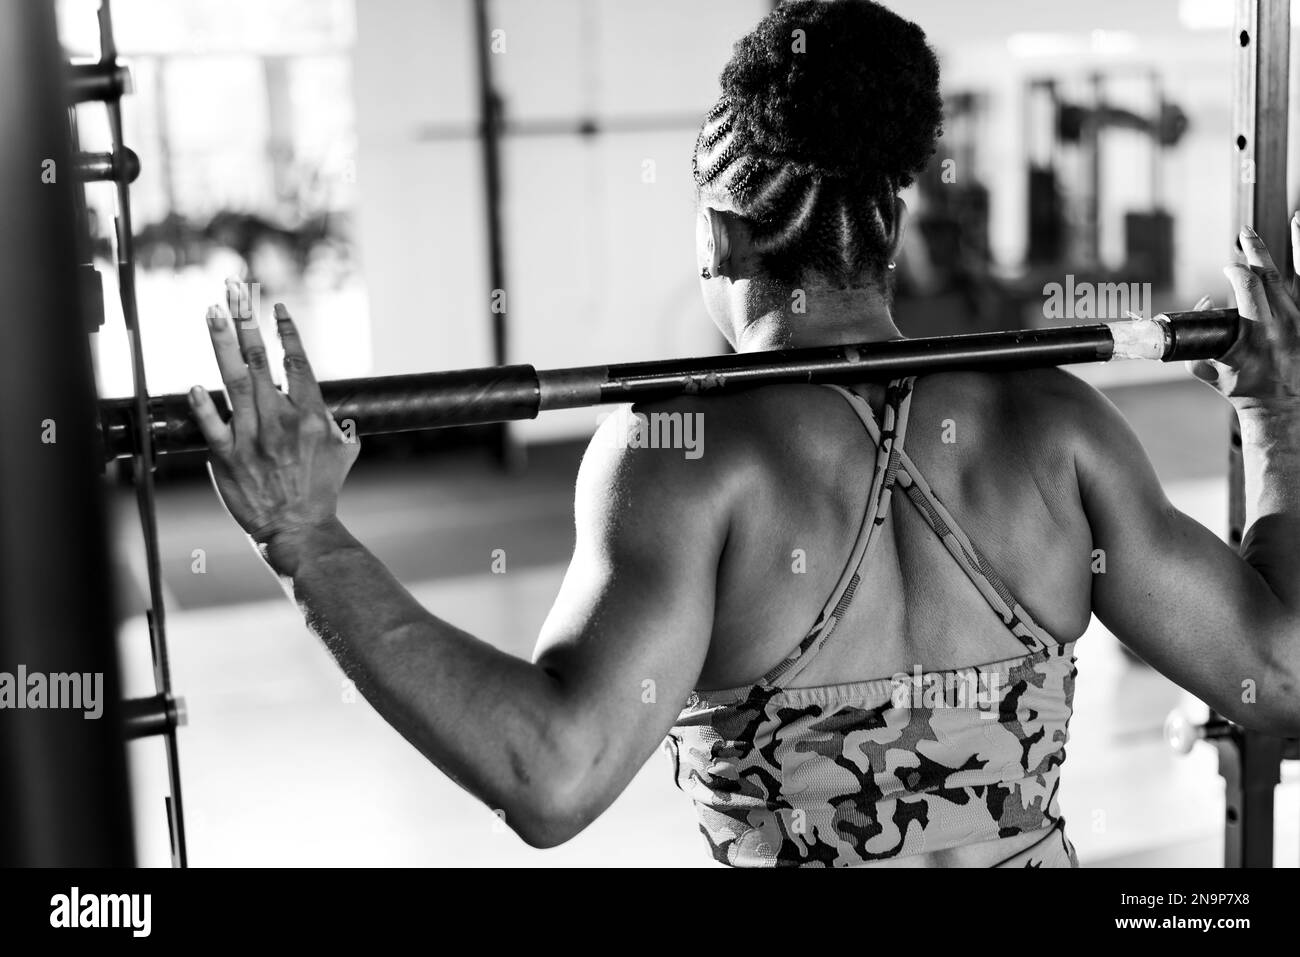 Determined woman doing squat exercises with a barbell and barbell at the gym. Body strengthening. Stock Photo